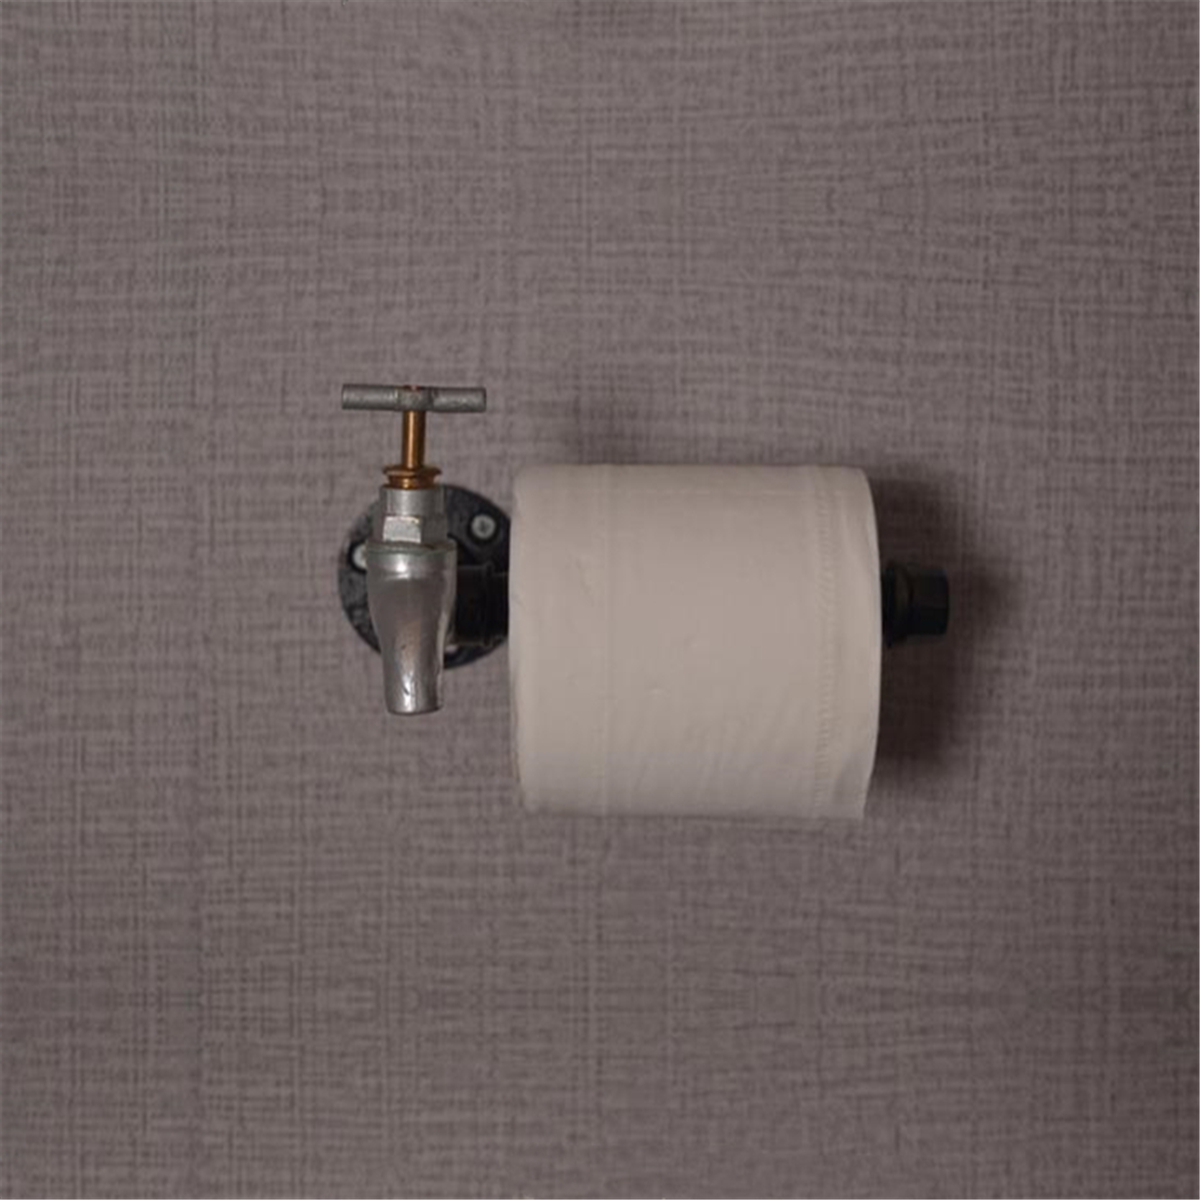 Retro-Industrial-Toilet-Paper-Roll-Holder-Pipe-Shelf-Floating-Holder-Bathroom-Wall-Mounted-1390098-3